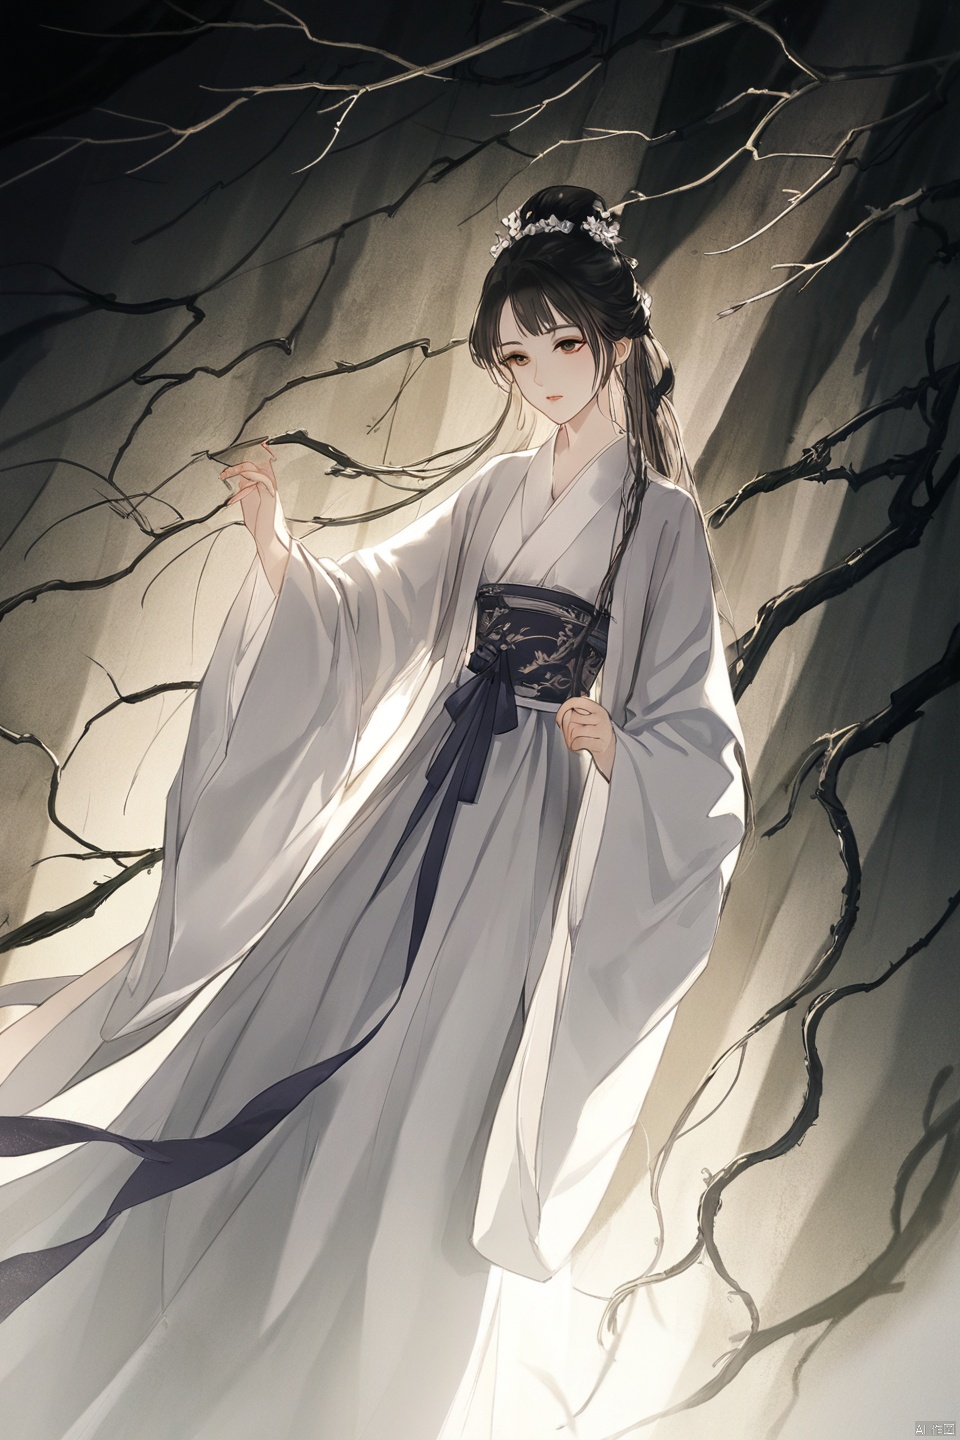  Fashion editorial style a asian girl with hanfu ruqun,Jin style, joint brand, ribbon, Withered leaves, old vines, plant illustration, splash ink,High fashion, trendy, stylish, editorial, magazine style, professional, highly detailed, cinematic lighting, Dramatic lighting, concept art